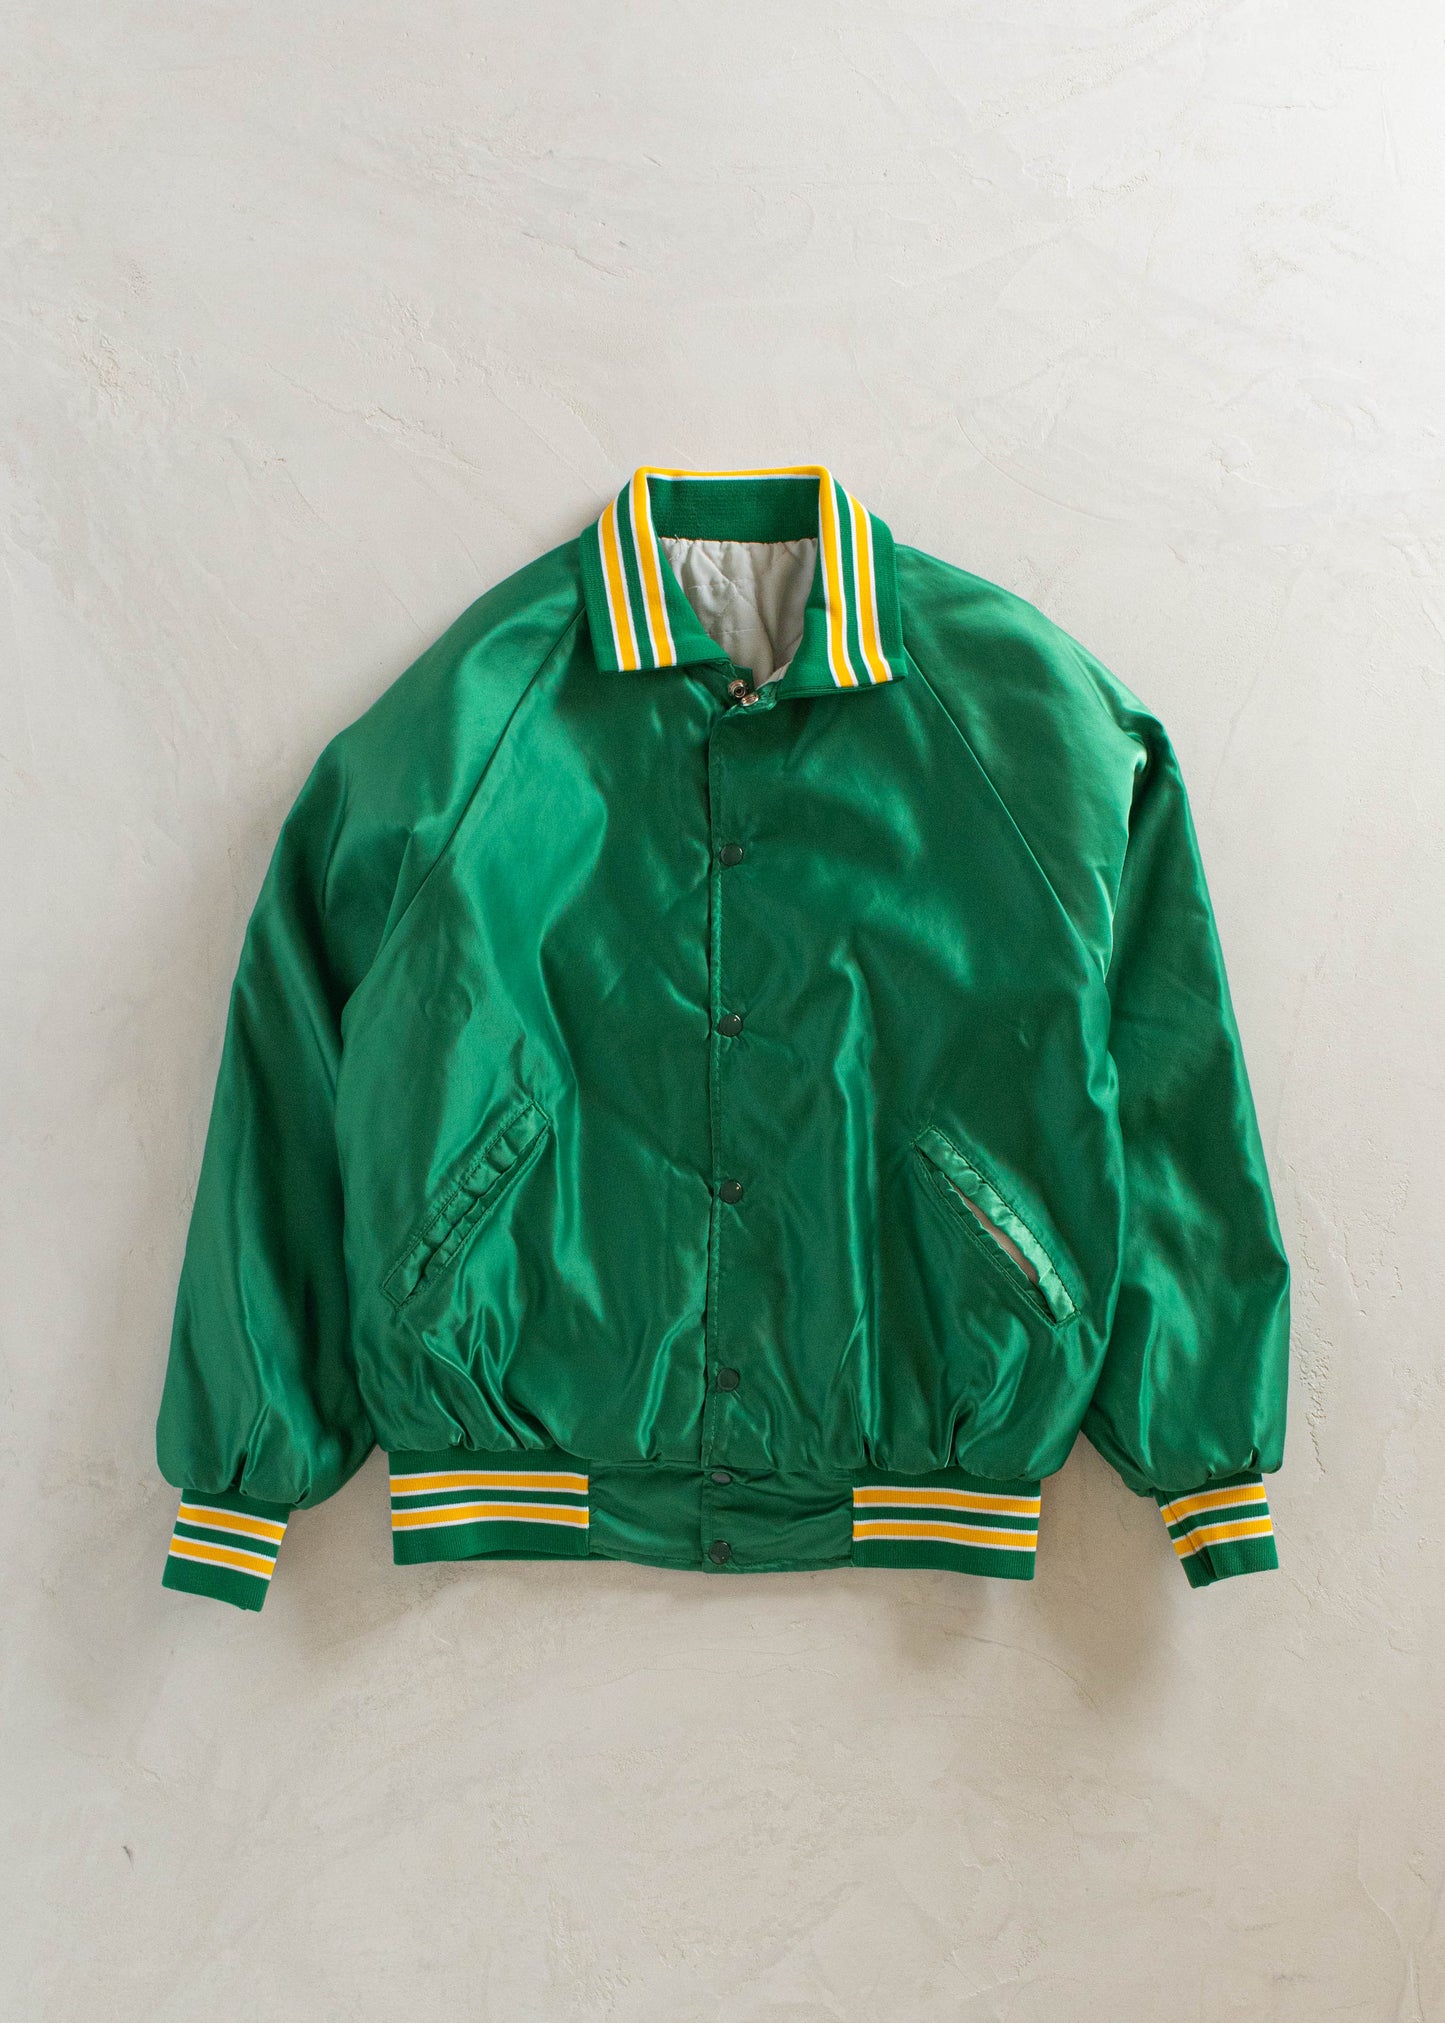 1980s Nylon Quilted Lining Bomber Jacket Size M/L